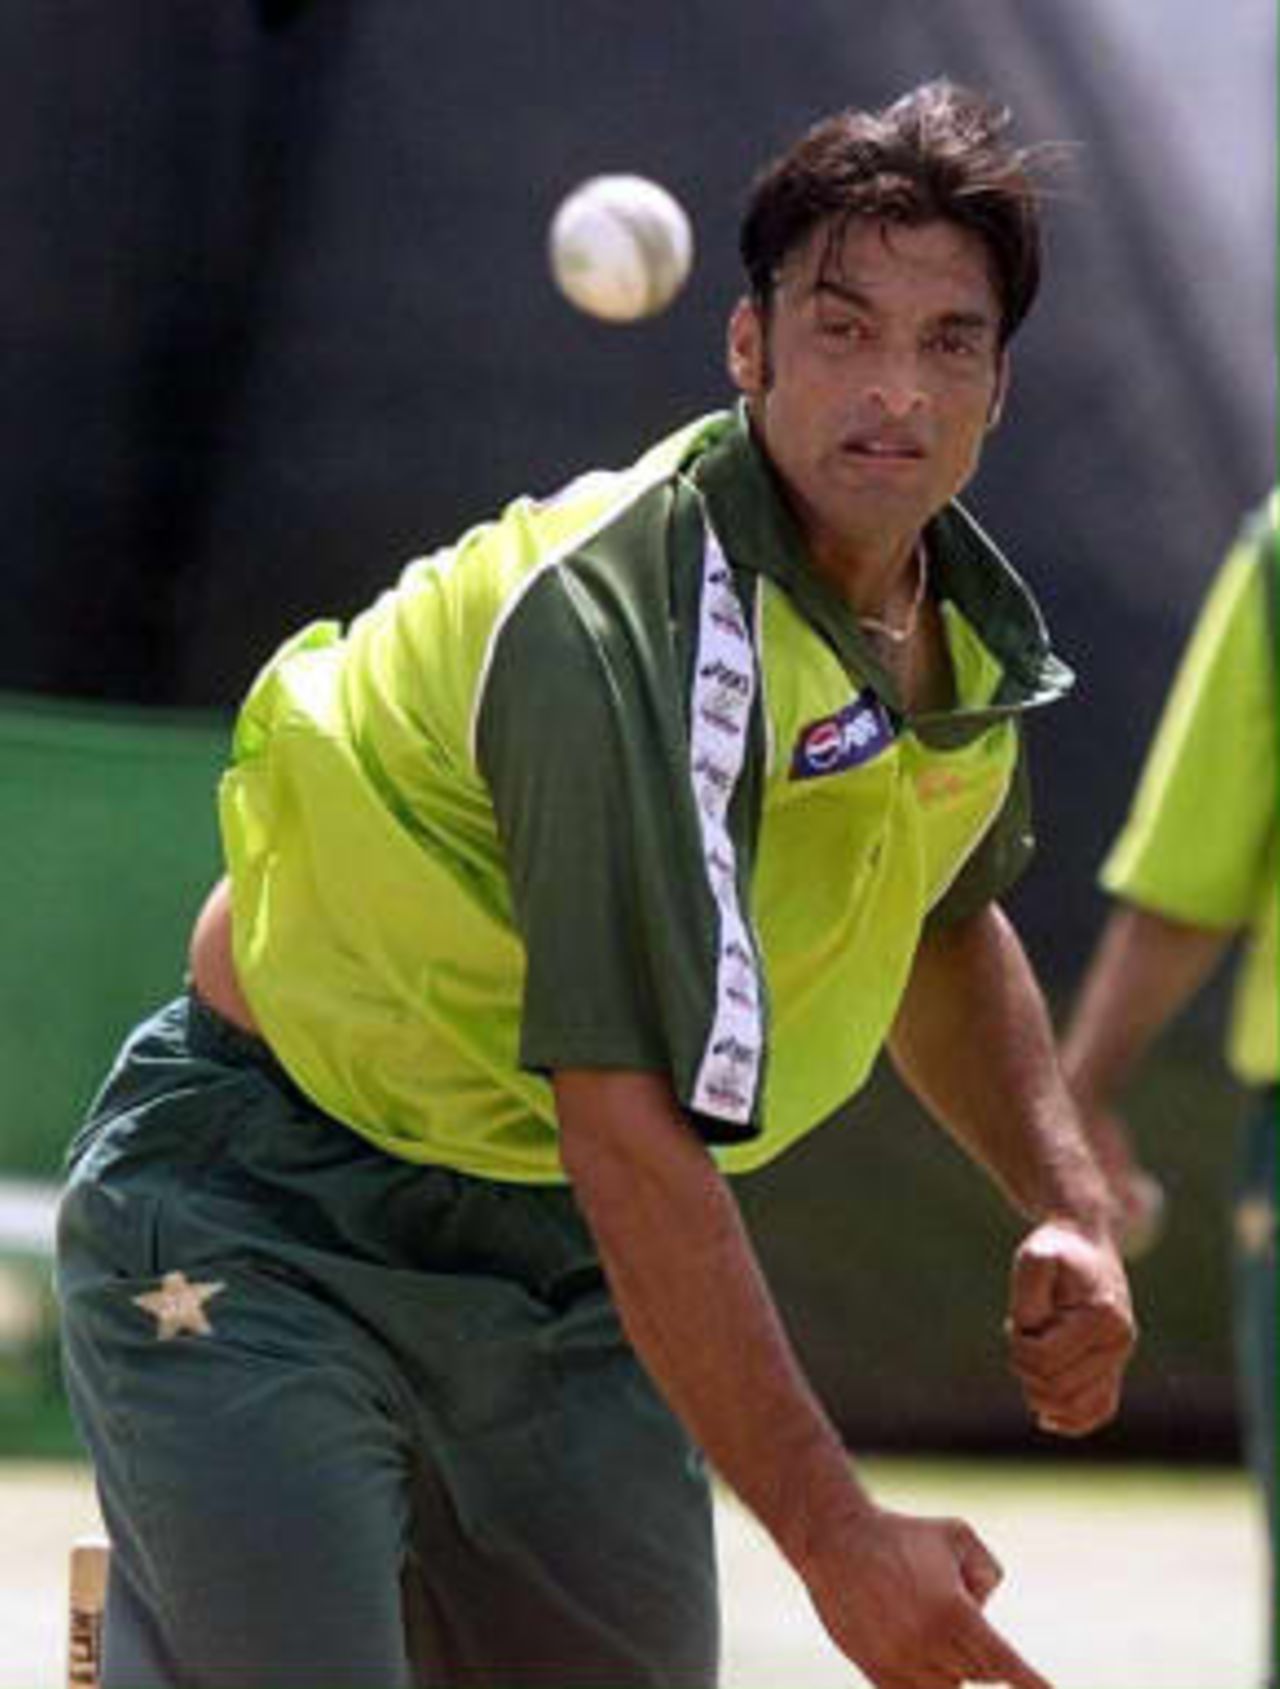 Pakistan pace bowler Shoaib Akhtar keeps his eye on the ball during a nets practice session at Old Trafford, Manchester, 15 June 1999 prior to his sides Cricket World Cup semi final match against New Zealand 16 June 1999